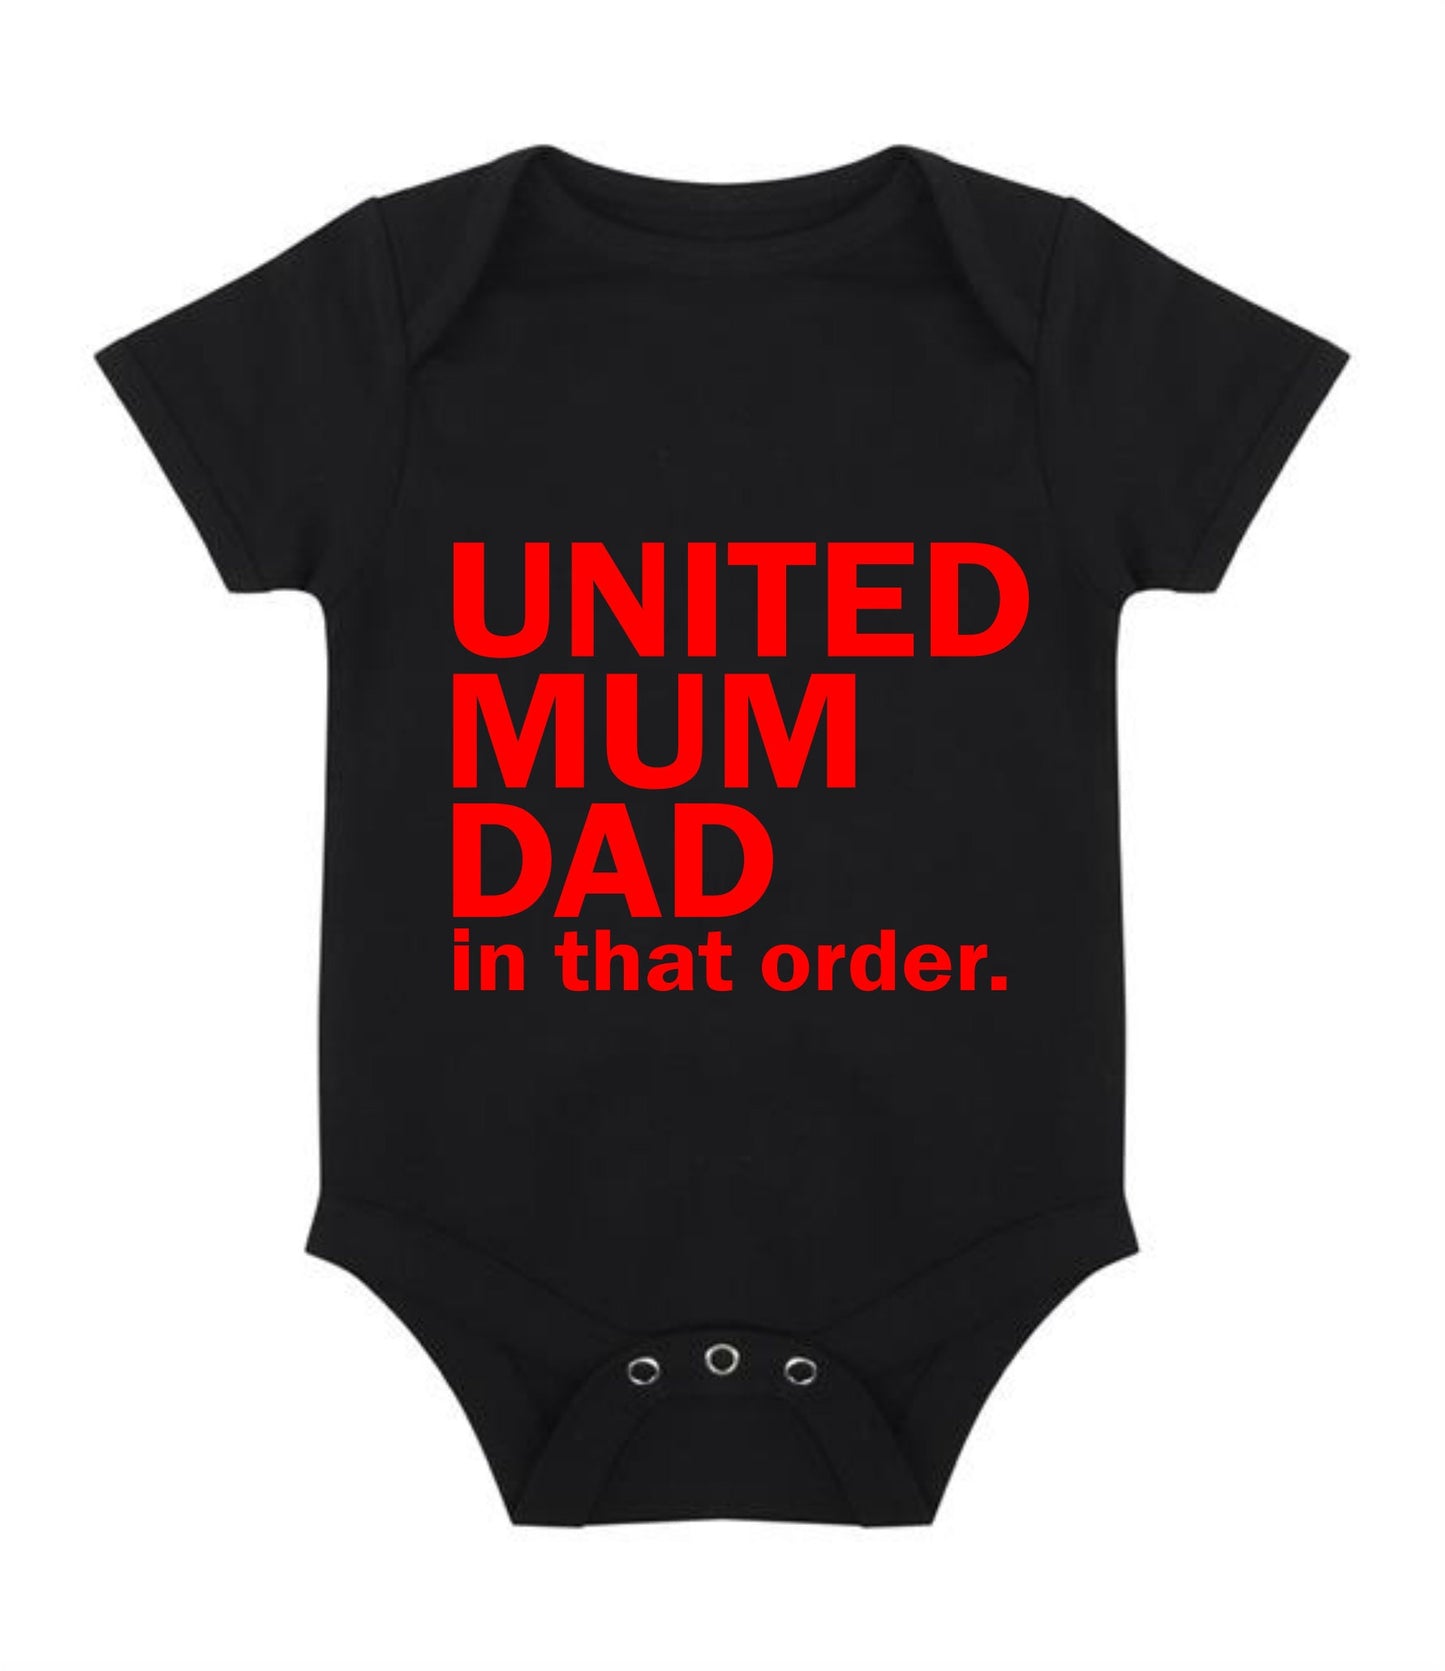 United Dad Mum / United Mum Dad in that order - Childrens Manchester short sleeved baby suit babygrow